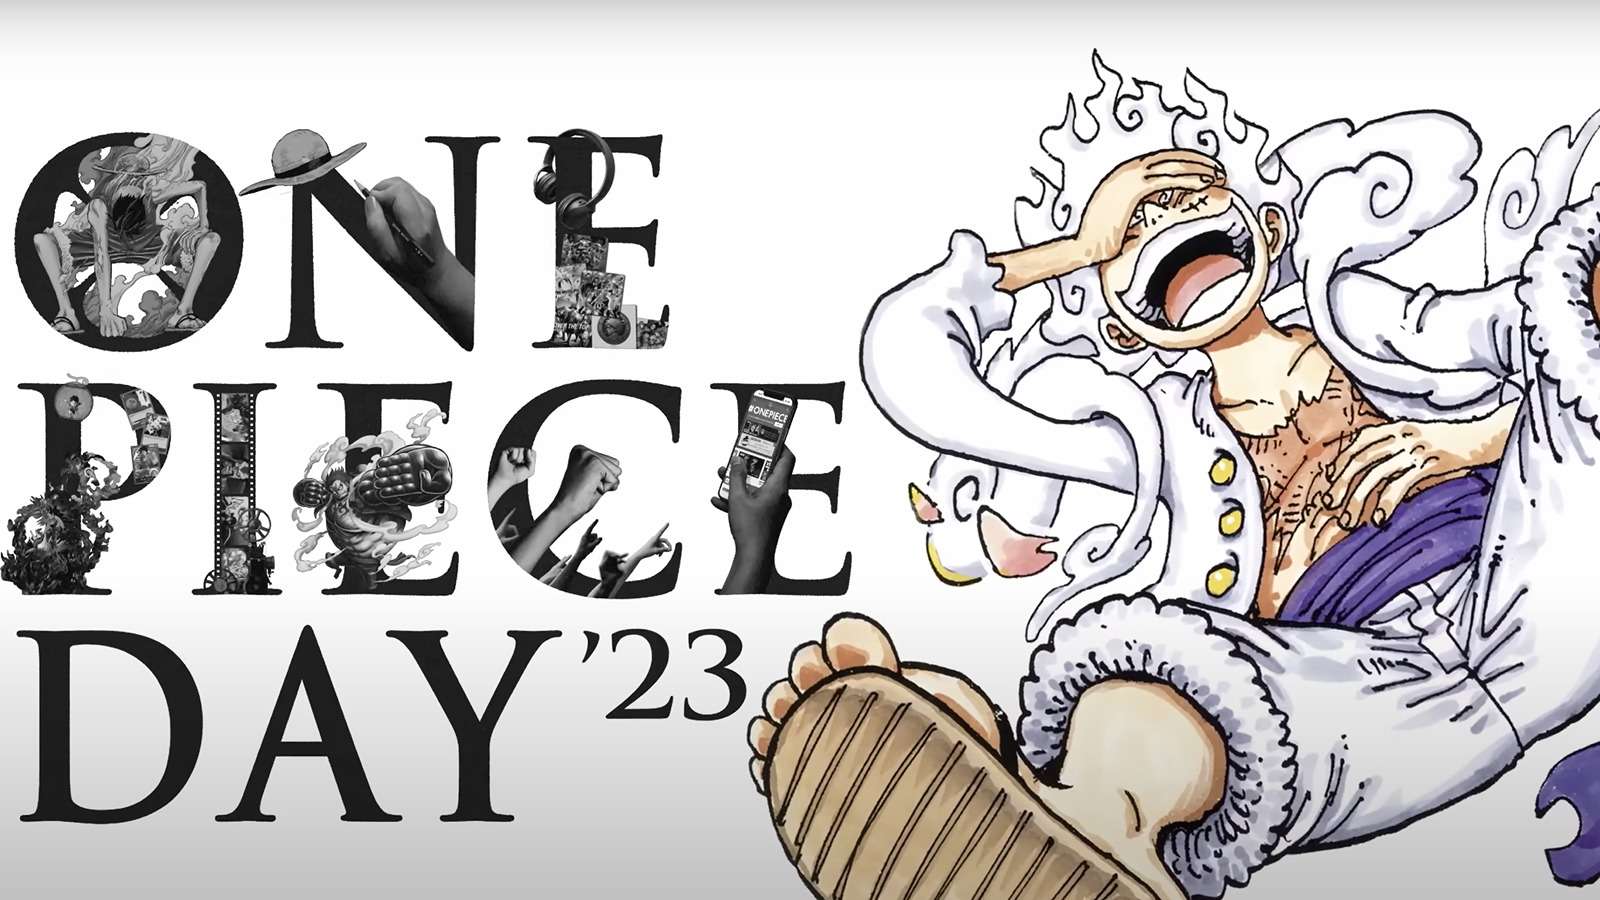 A still from One Piece Day 2023 teaser